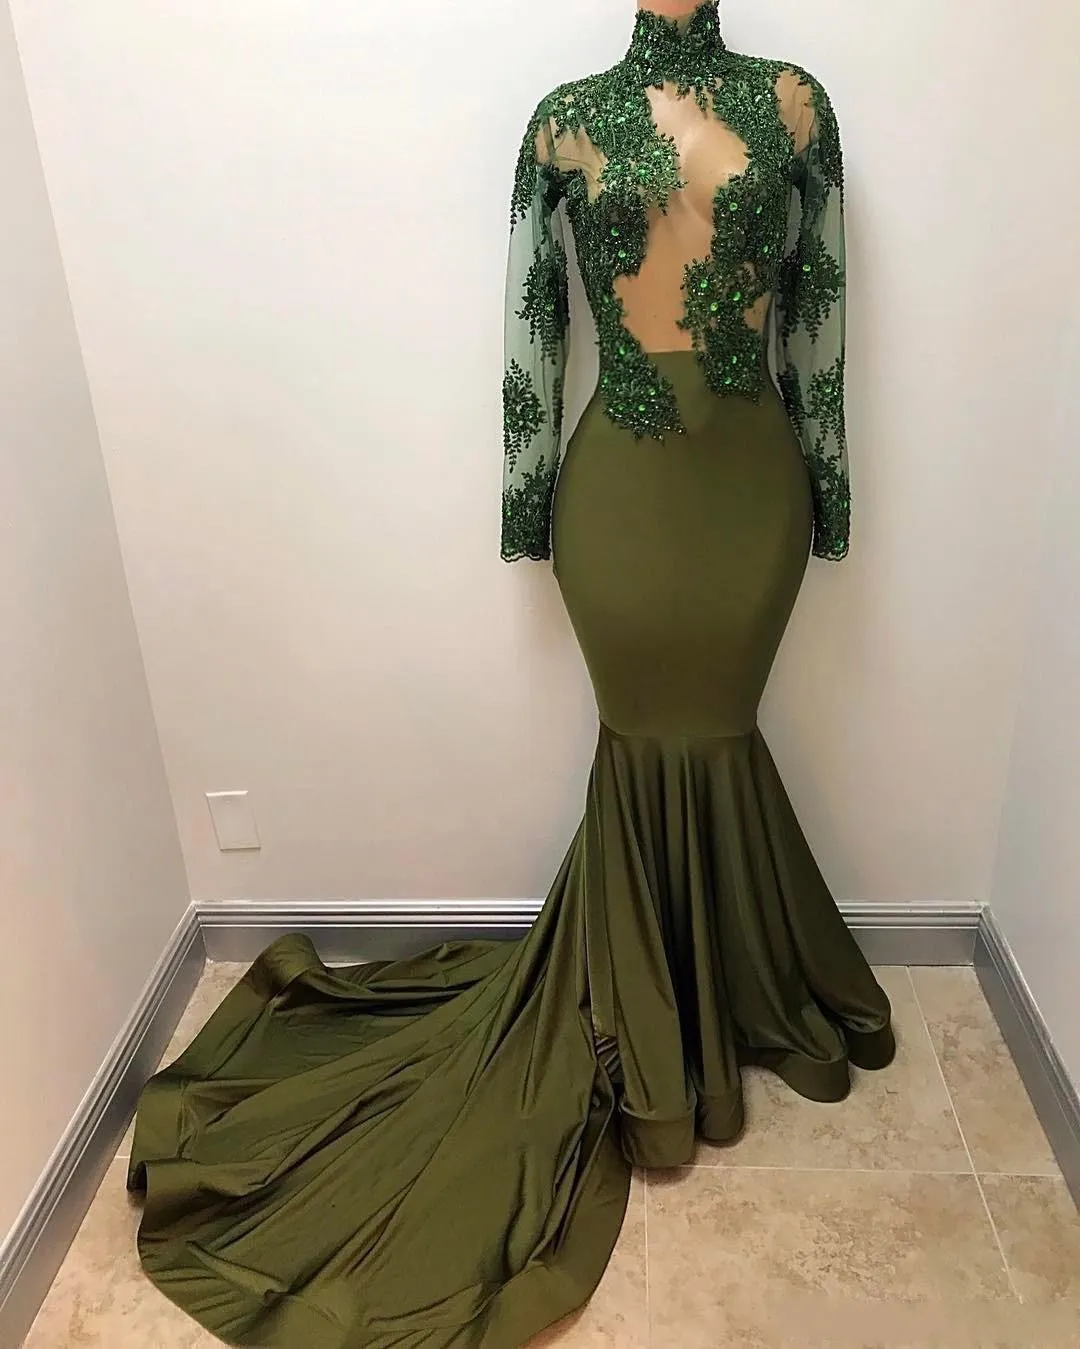 Elegant High Neck Mermaid Evening Dresses Sexy See Though Appliques Beaded Long Sleeves Prom Dress Fishtail Special Occasion Formal Gowns